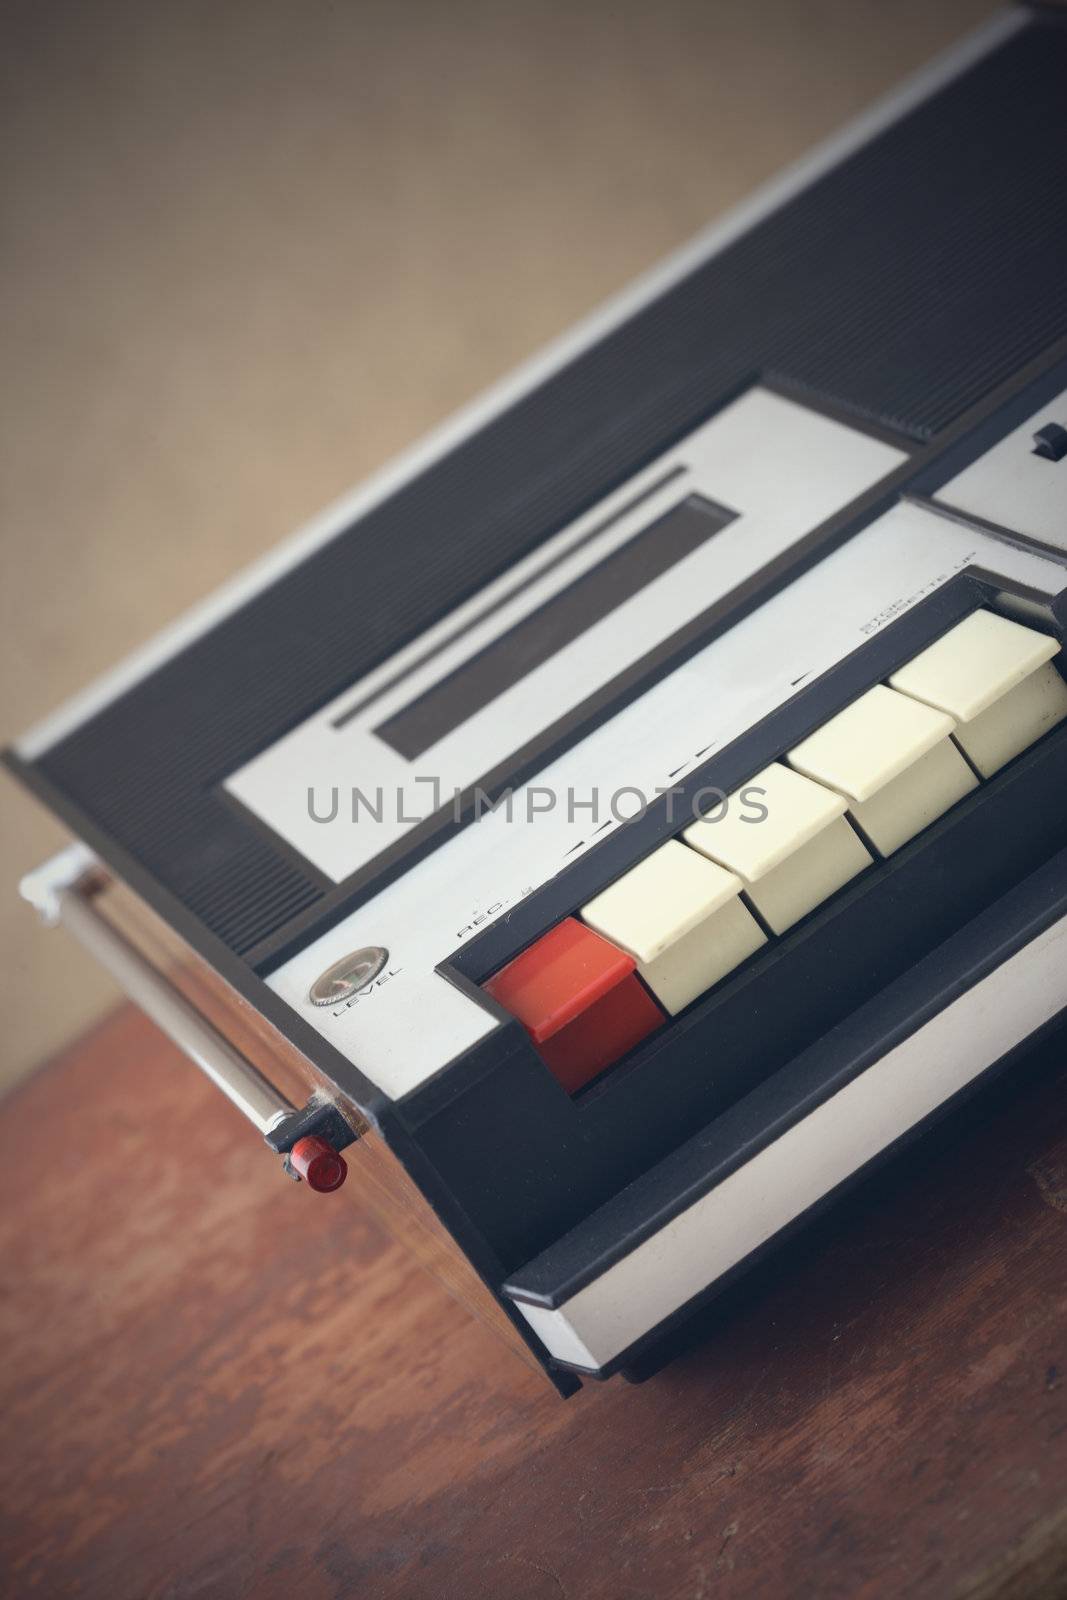 old monophonic cassette recorder from the early 1970s